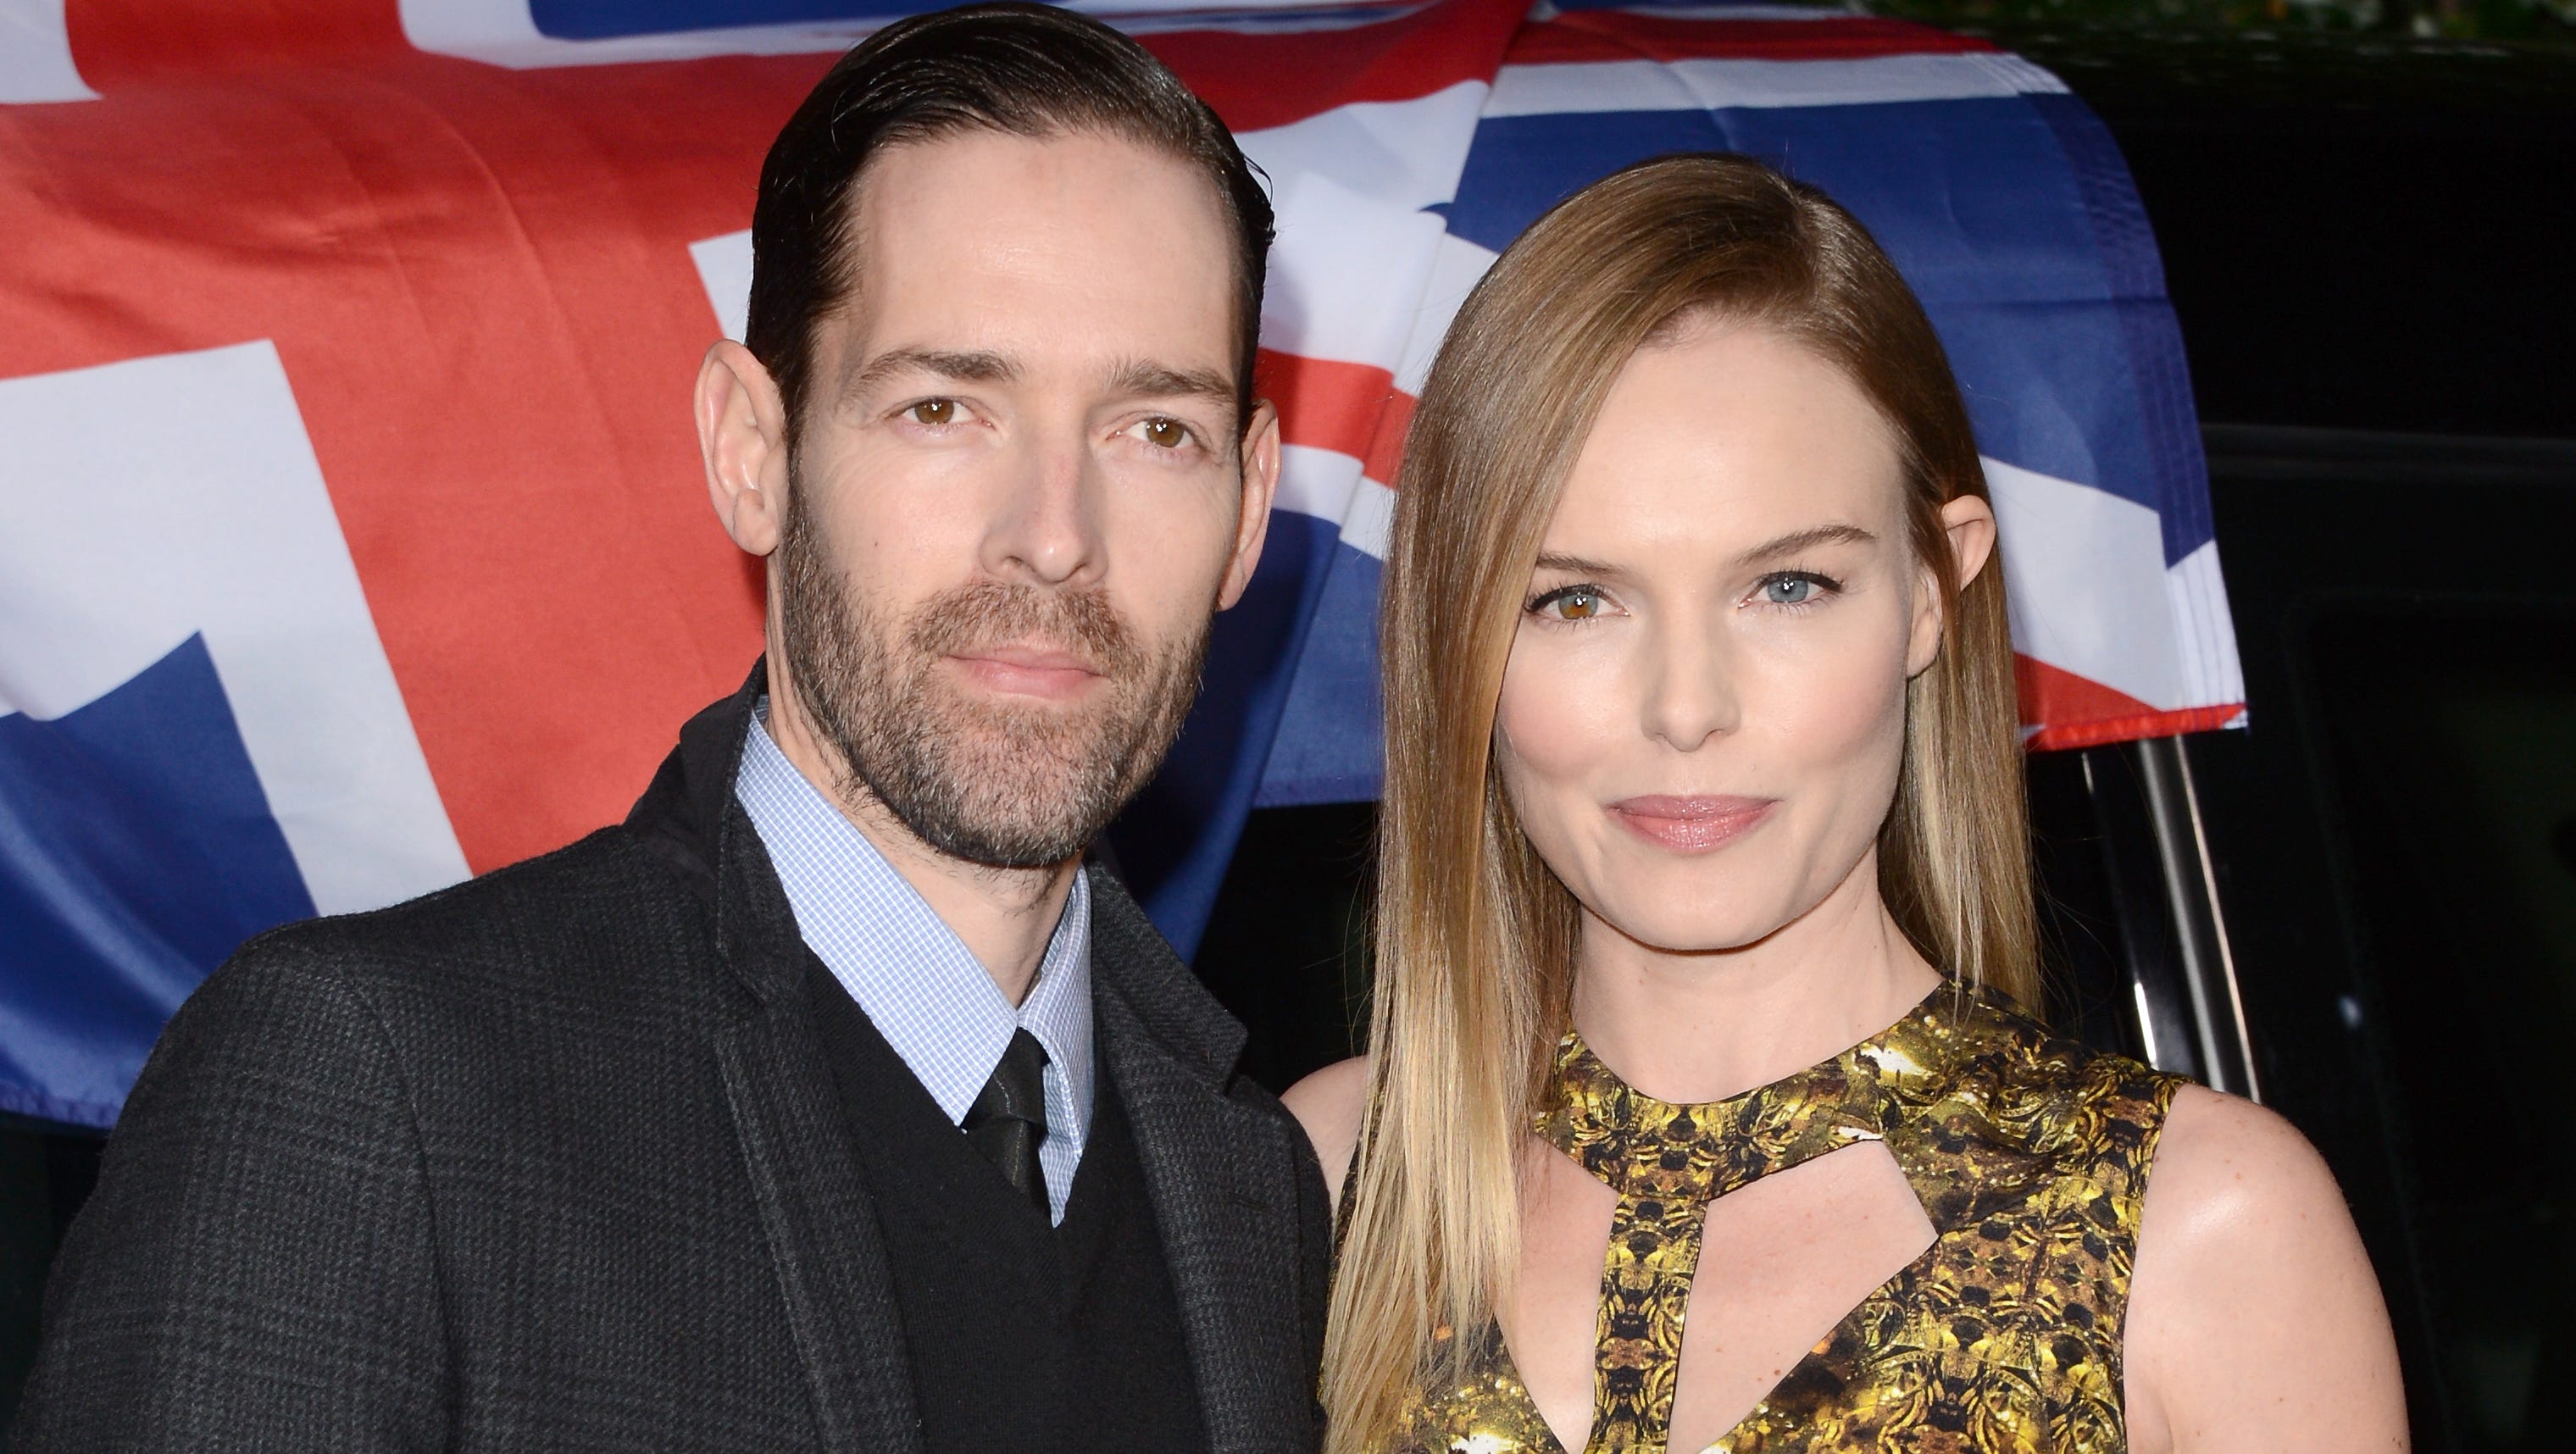 Who Is Kate Bosworth Married To